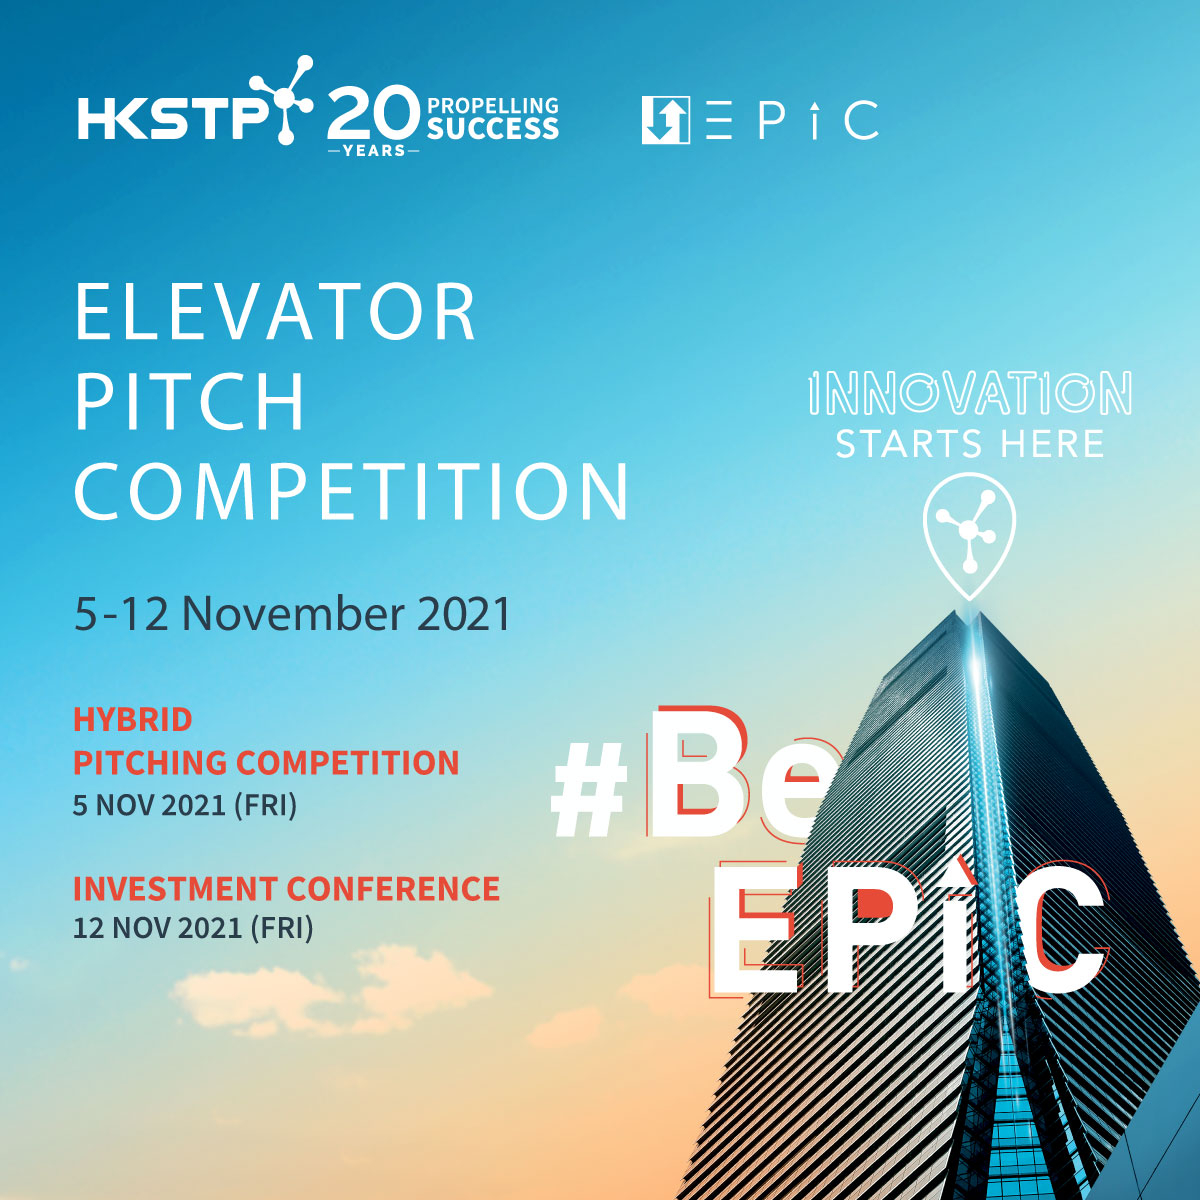 EPiC 2021 Investment Conference – Invest in Co-creation for Future